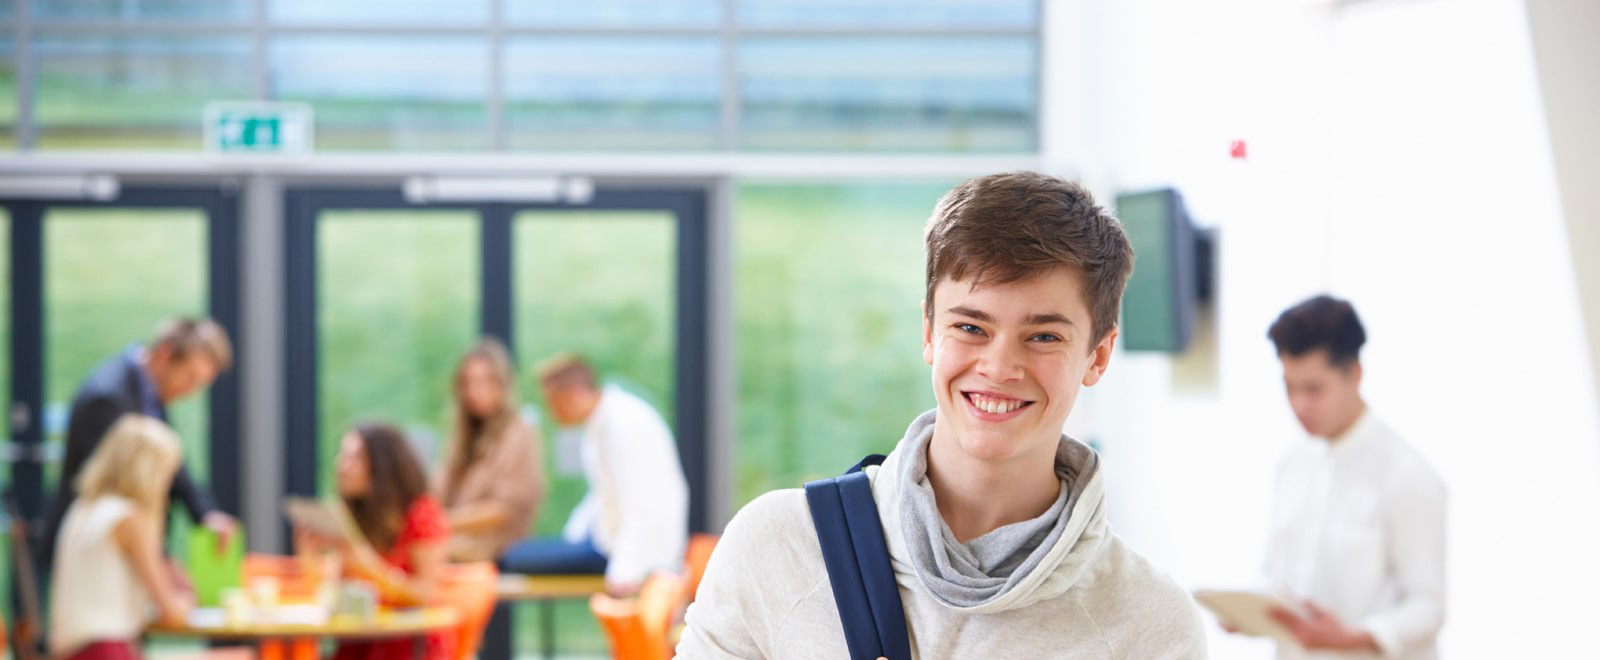 student at school with backpack - image for Tutoring Subjects page